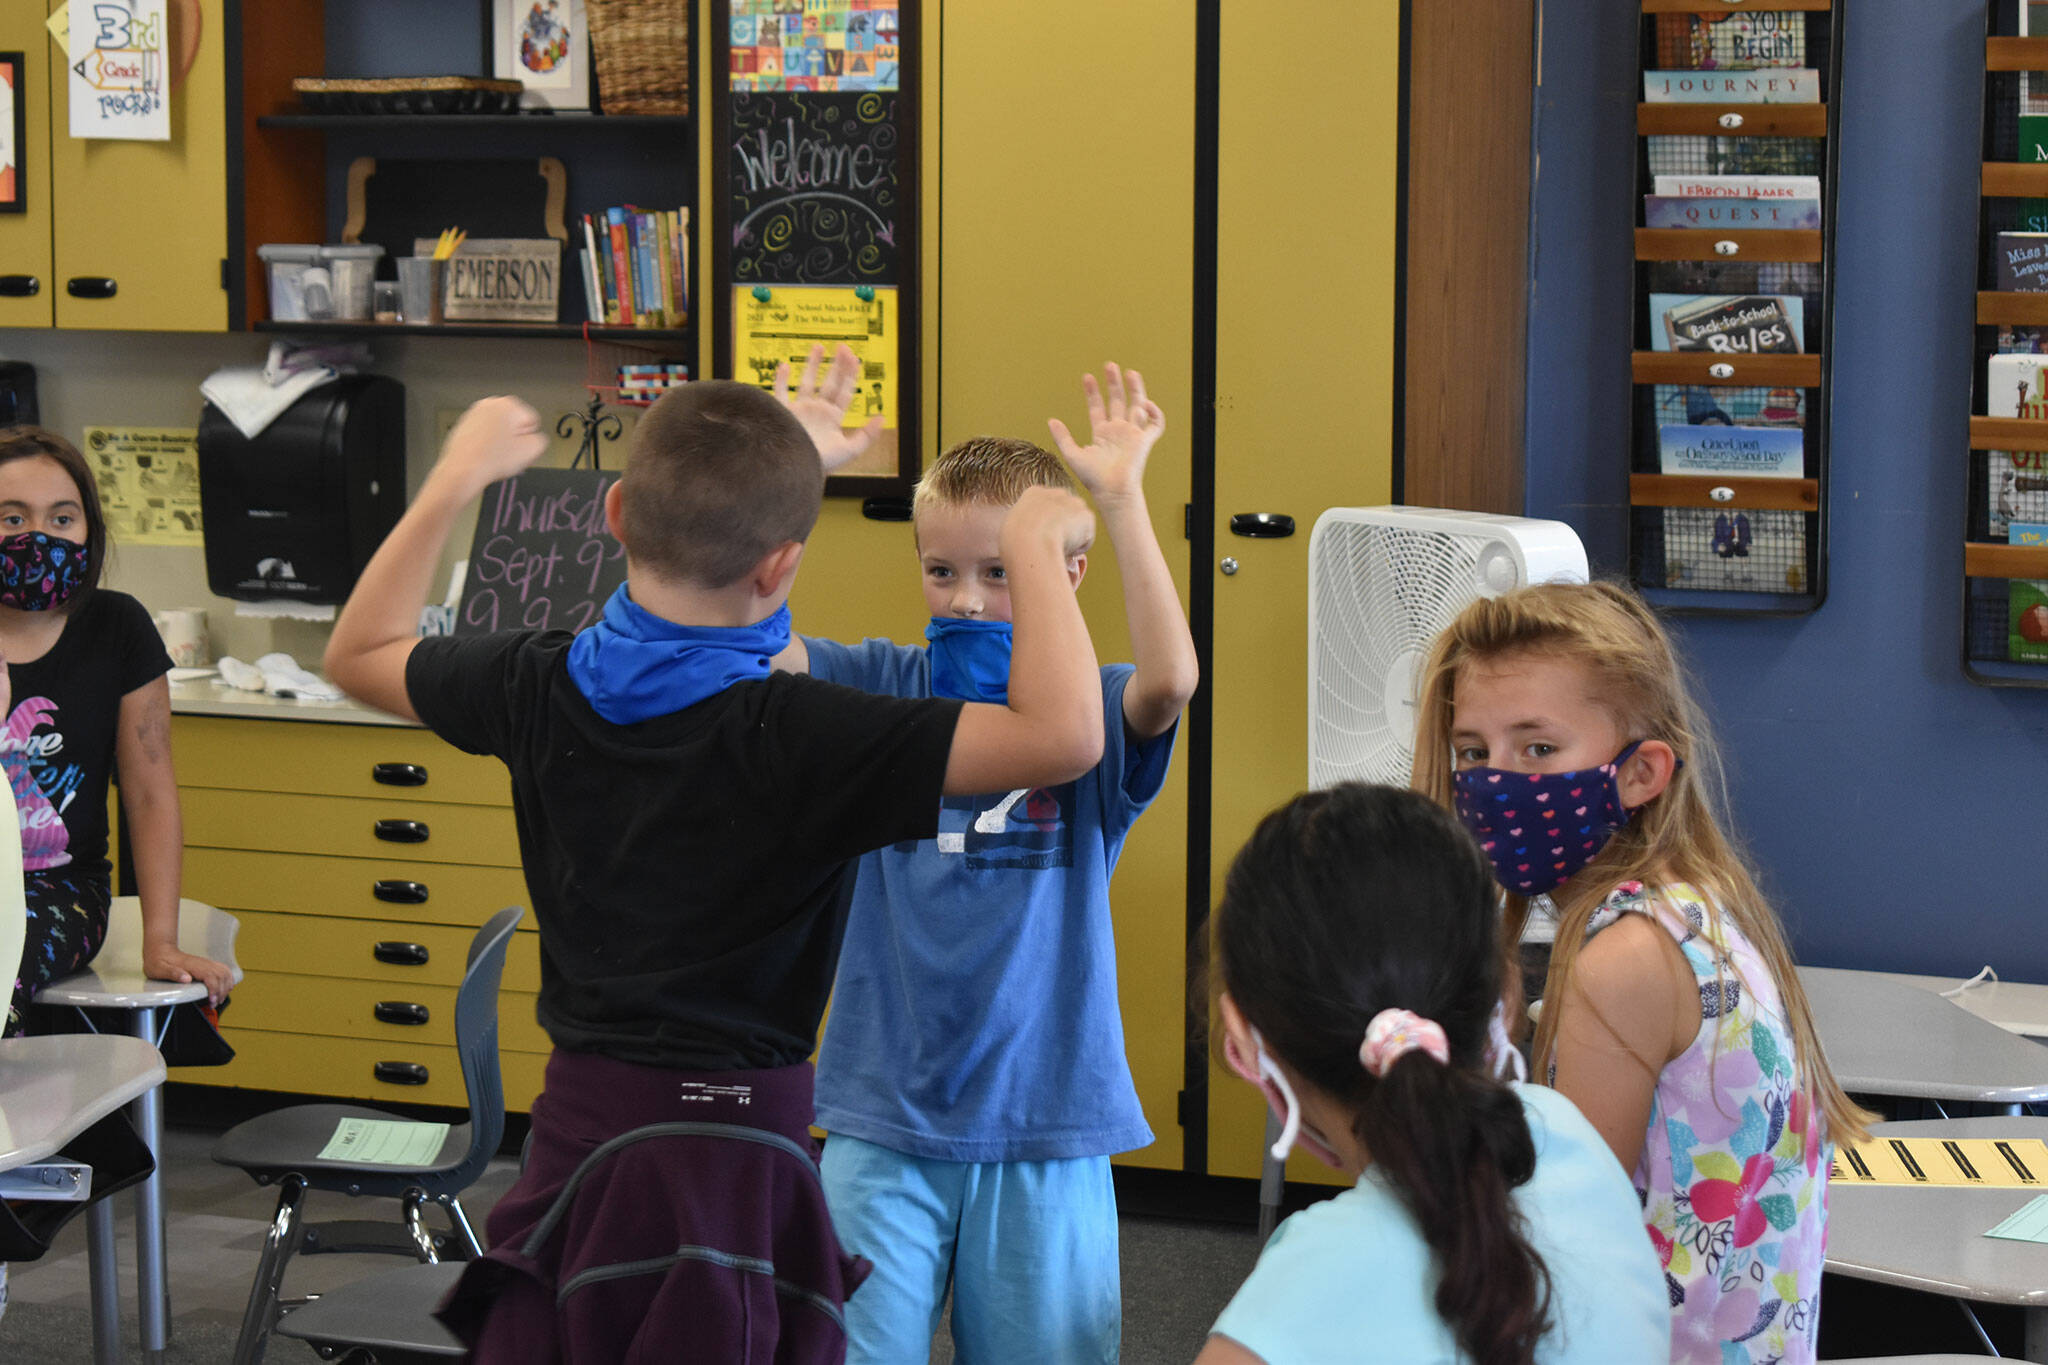 Two students greet each other in Emerson’s classroom. Photo by Alex Bruell